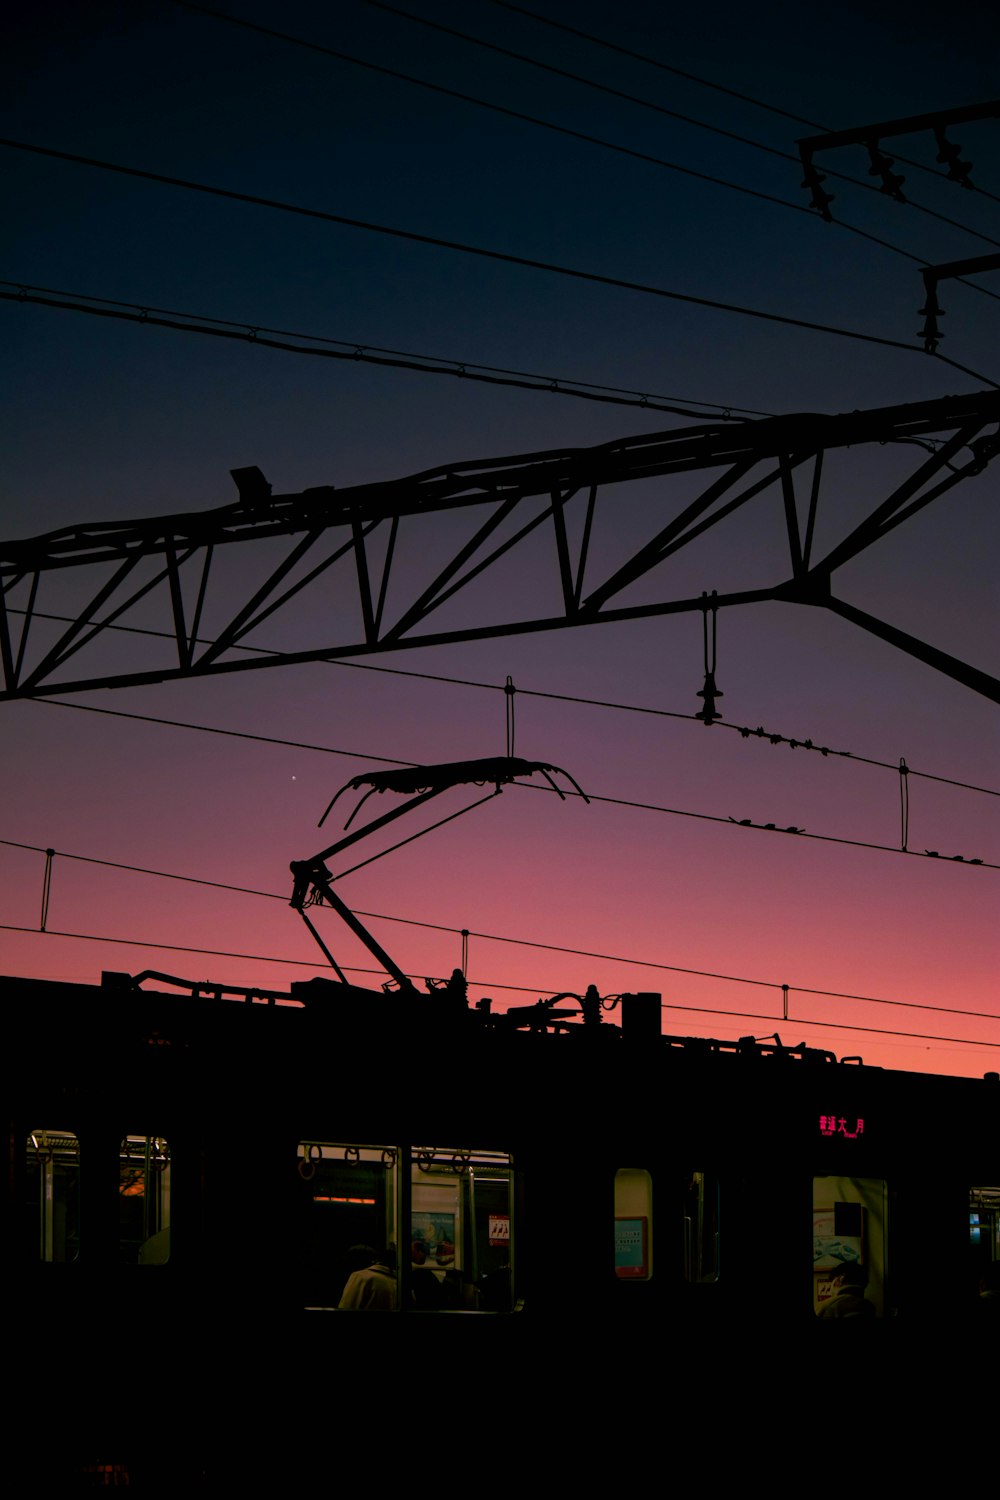 the silhouette of a train at dusk with the sky in the background